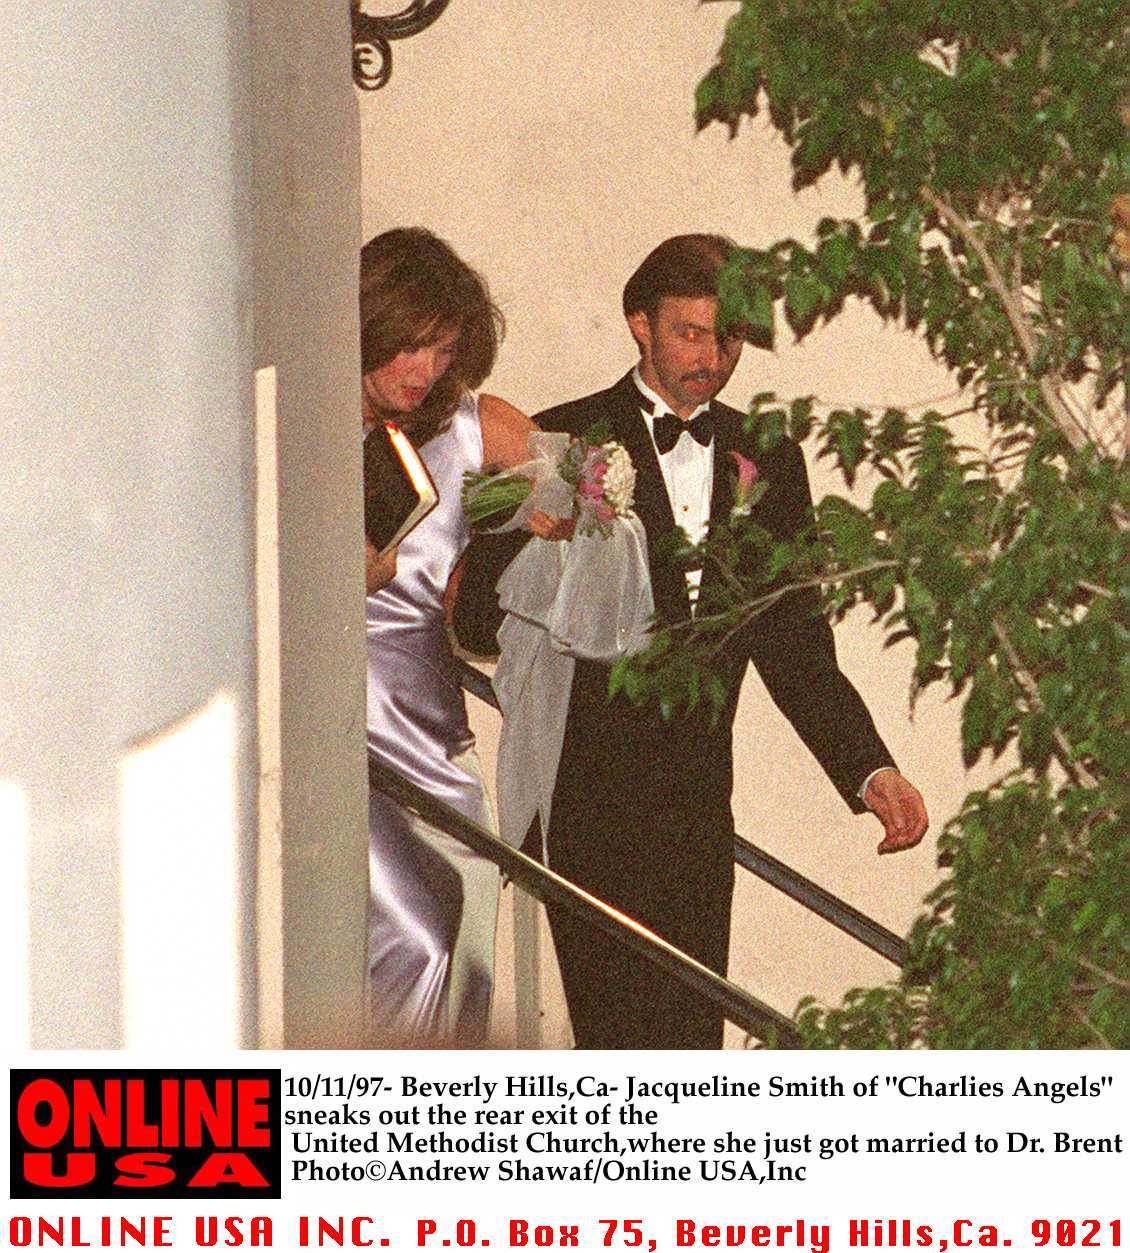  Beverly Hills,Ca Jacqueline Smith Leaving The Rear Exit Of The Methodist Church Where She Just Got Married To Dr. Brent Allen. | Source: Getty Images